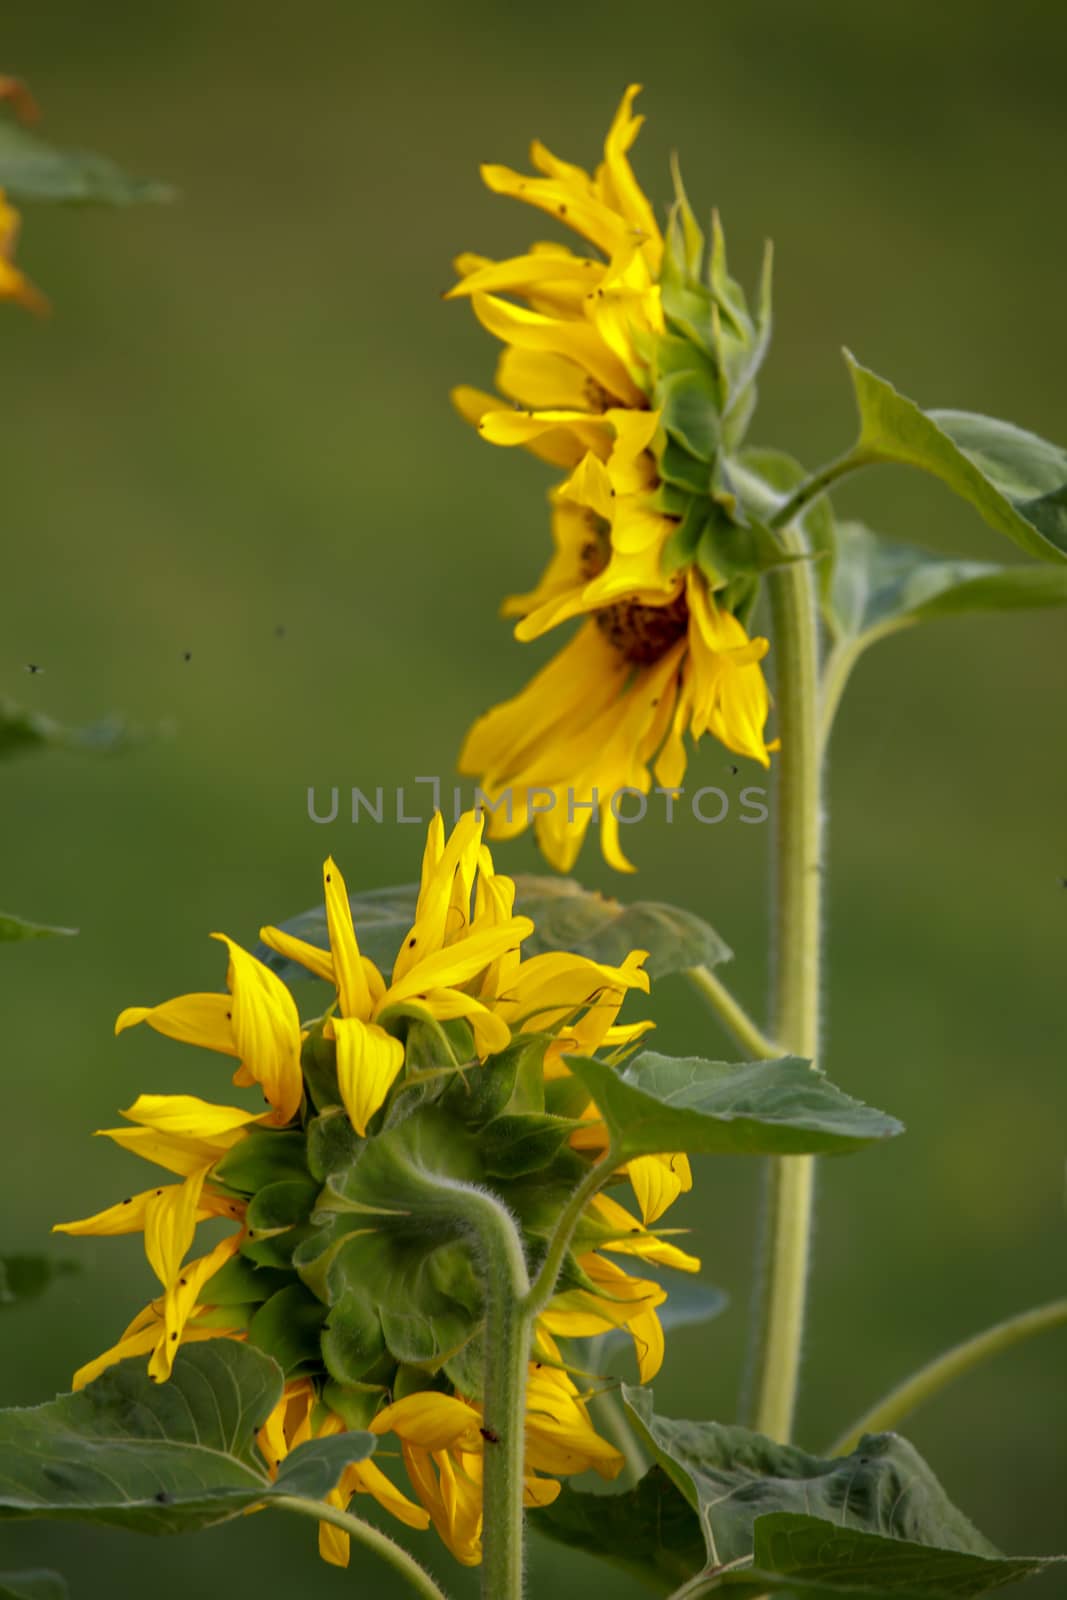 Blooming flowers. Sunflowers on a green grass.  Meadow with sunflowers. Wild flowers. Nature flower. Sunflowers on field. Sunflower is tall plant of the daisy family, with very large golden-rayed flowers.